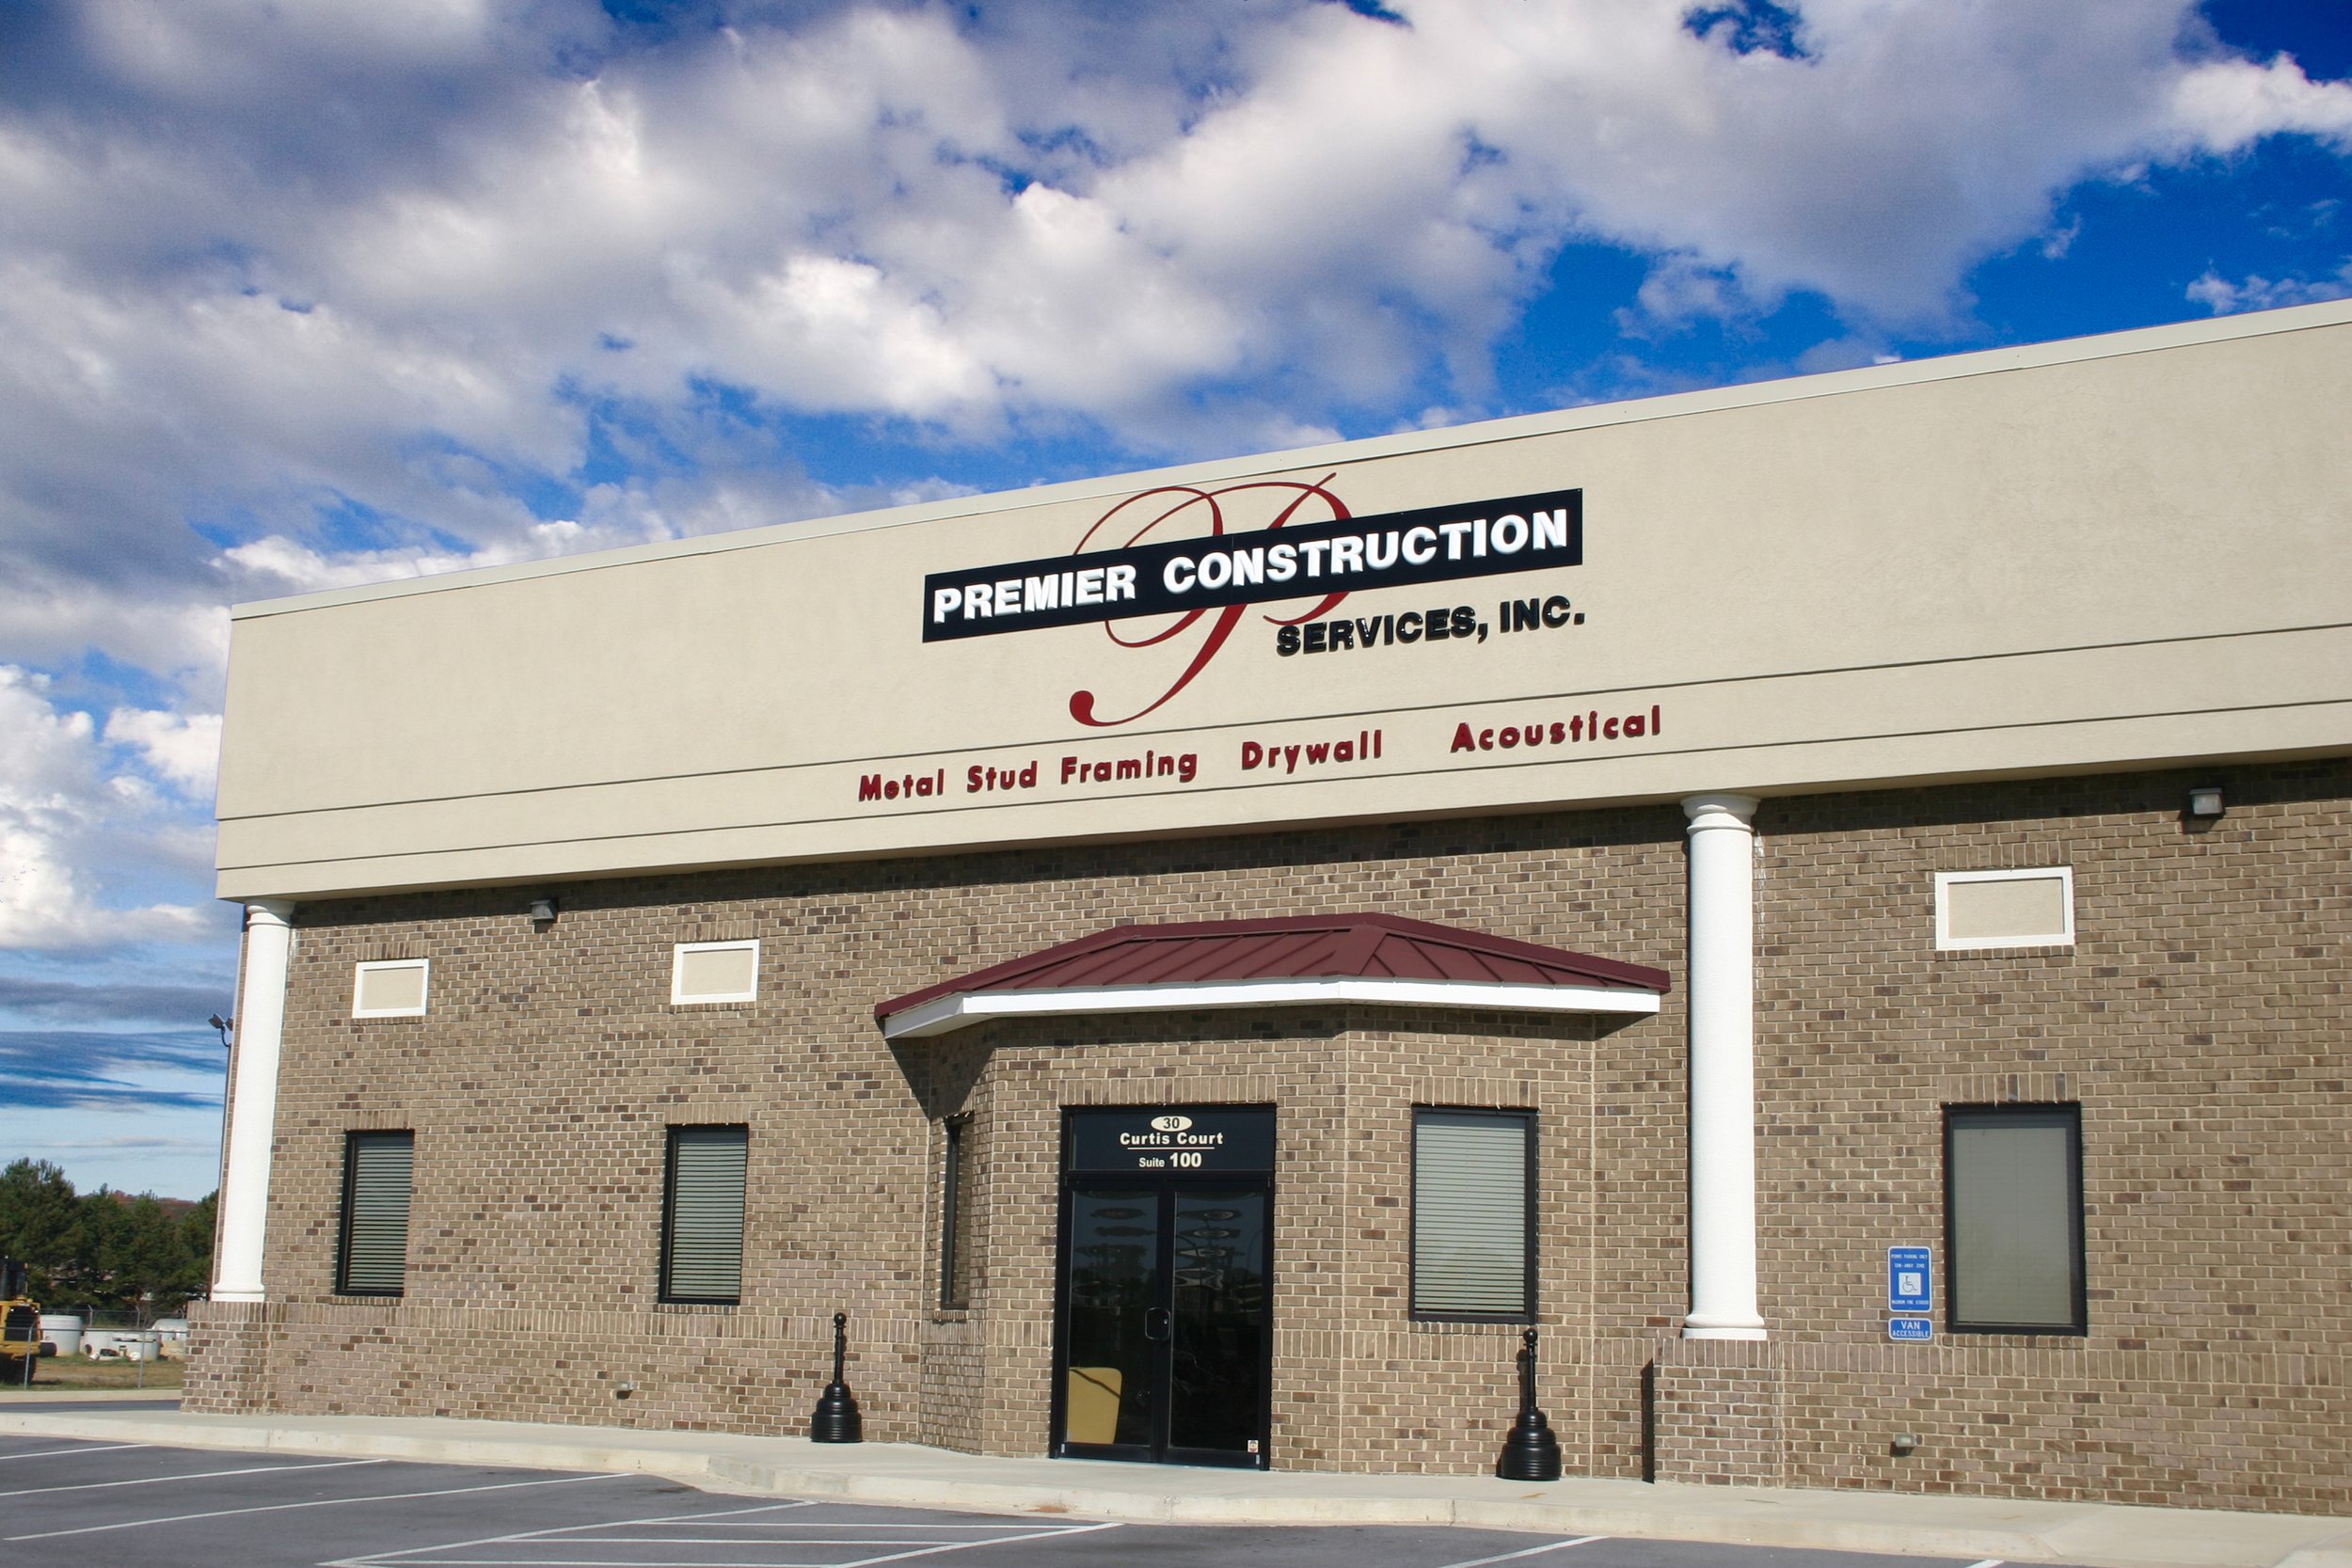 Commercial Office Facility for Premier Construction.JPG